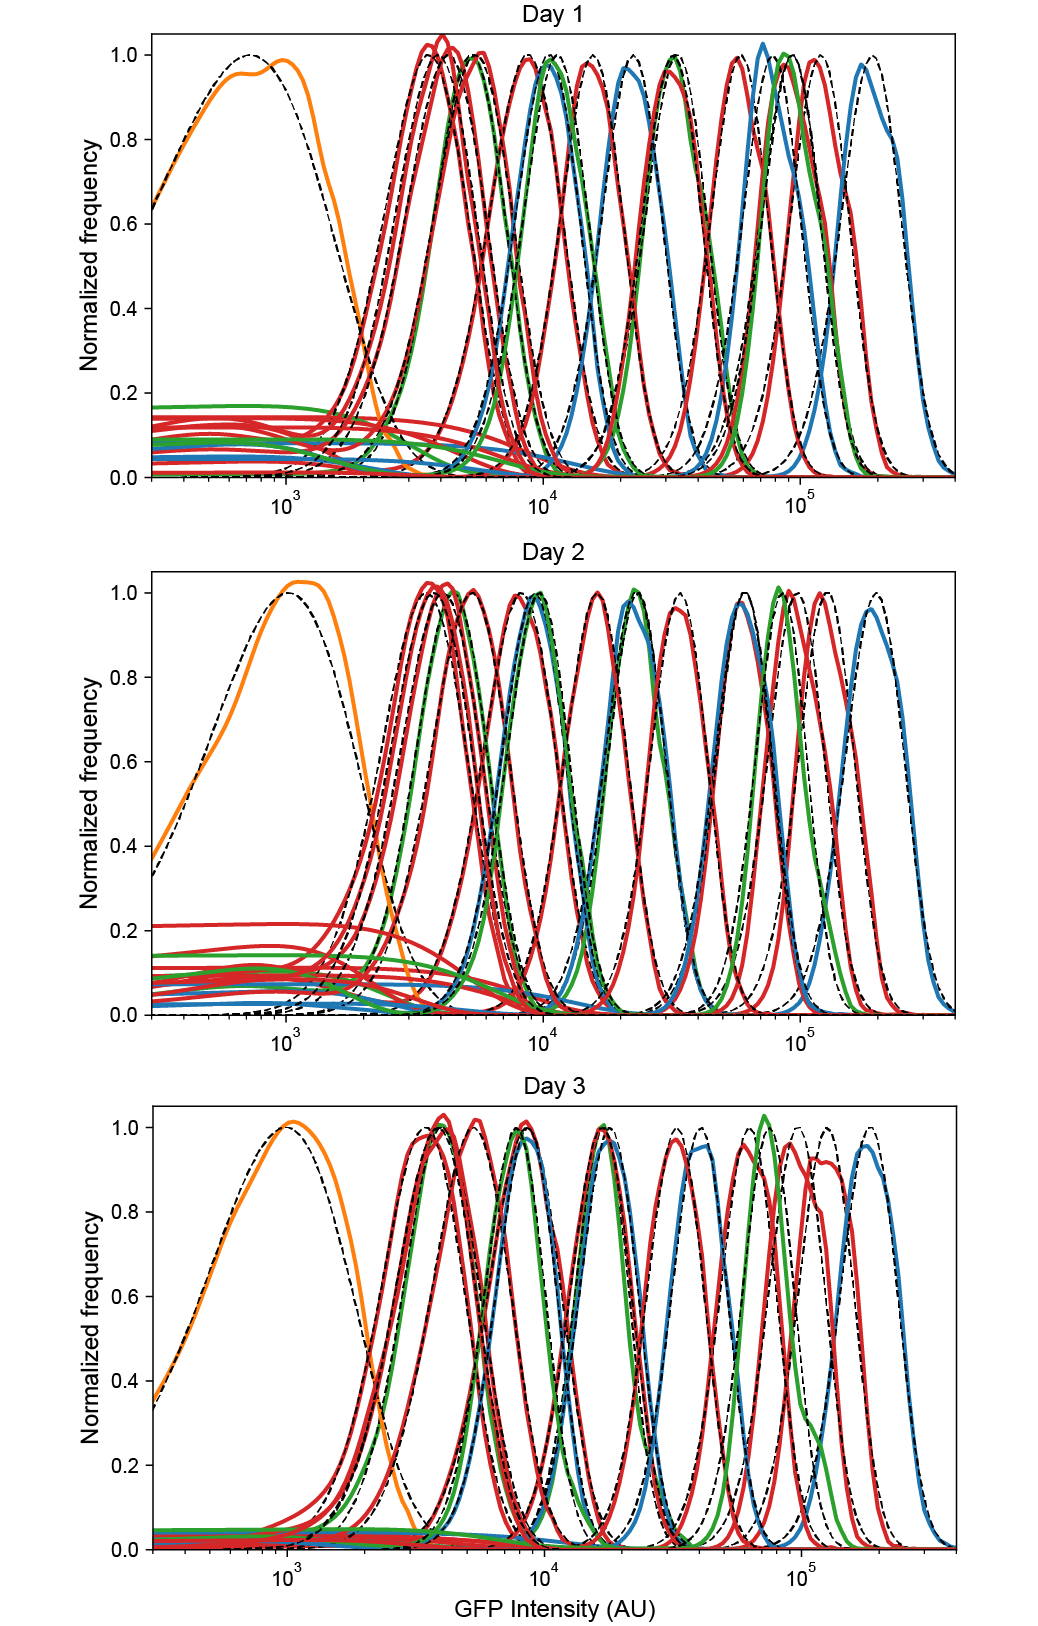 Figure S1: Reproducibility of low-noise expression in 3 independent experiments. Probability densities for each flow cytometry sample were calculated by kernel density estimates for the negative control plasmid pZH501 (orange), ZH509 (blue), pJS101 (green), and pJS102 (red) with fluorescence levels monotonically increasing with concentration of ATc (1, 5, 25, 125 nM) or IPTG (0, 2, 4.5, 10, 22.5, 50, 111.8, 250, 559, 1250). Distributions were fit by least squares regression to a gamma function (black dashed lines) to estimate sample mean and variance while minimizing the influence of non-fluorescent background events, which varied in frequency for different days and samples. All plots are normalized by the maximum value of the fit gamma distribution.